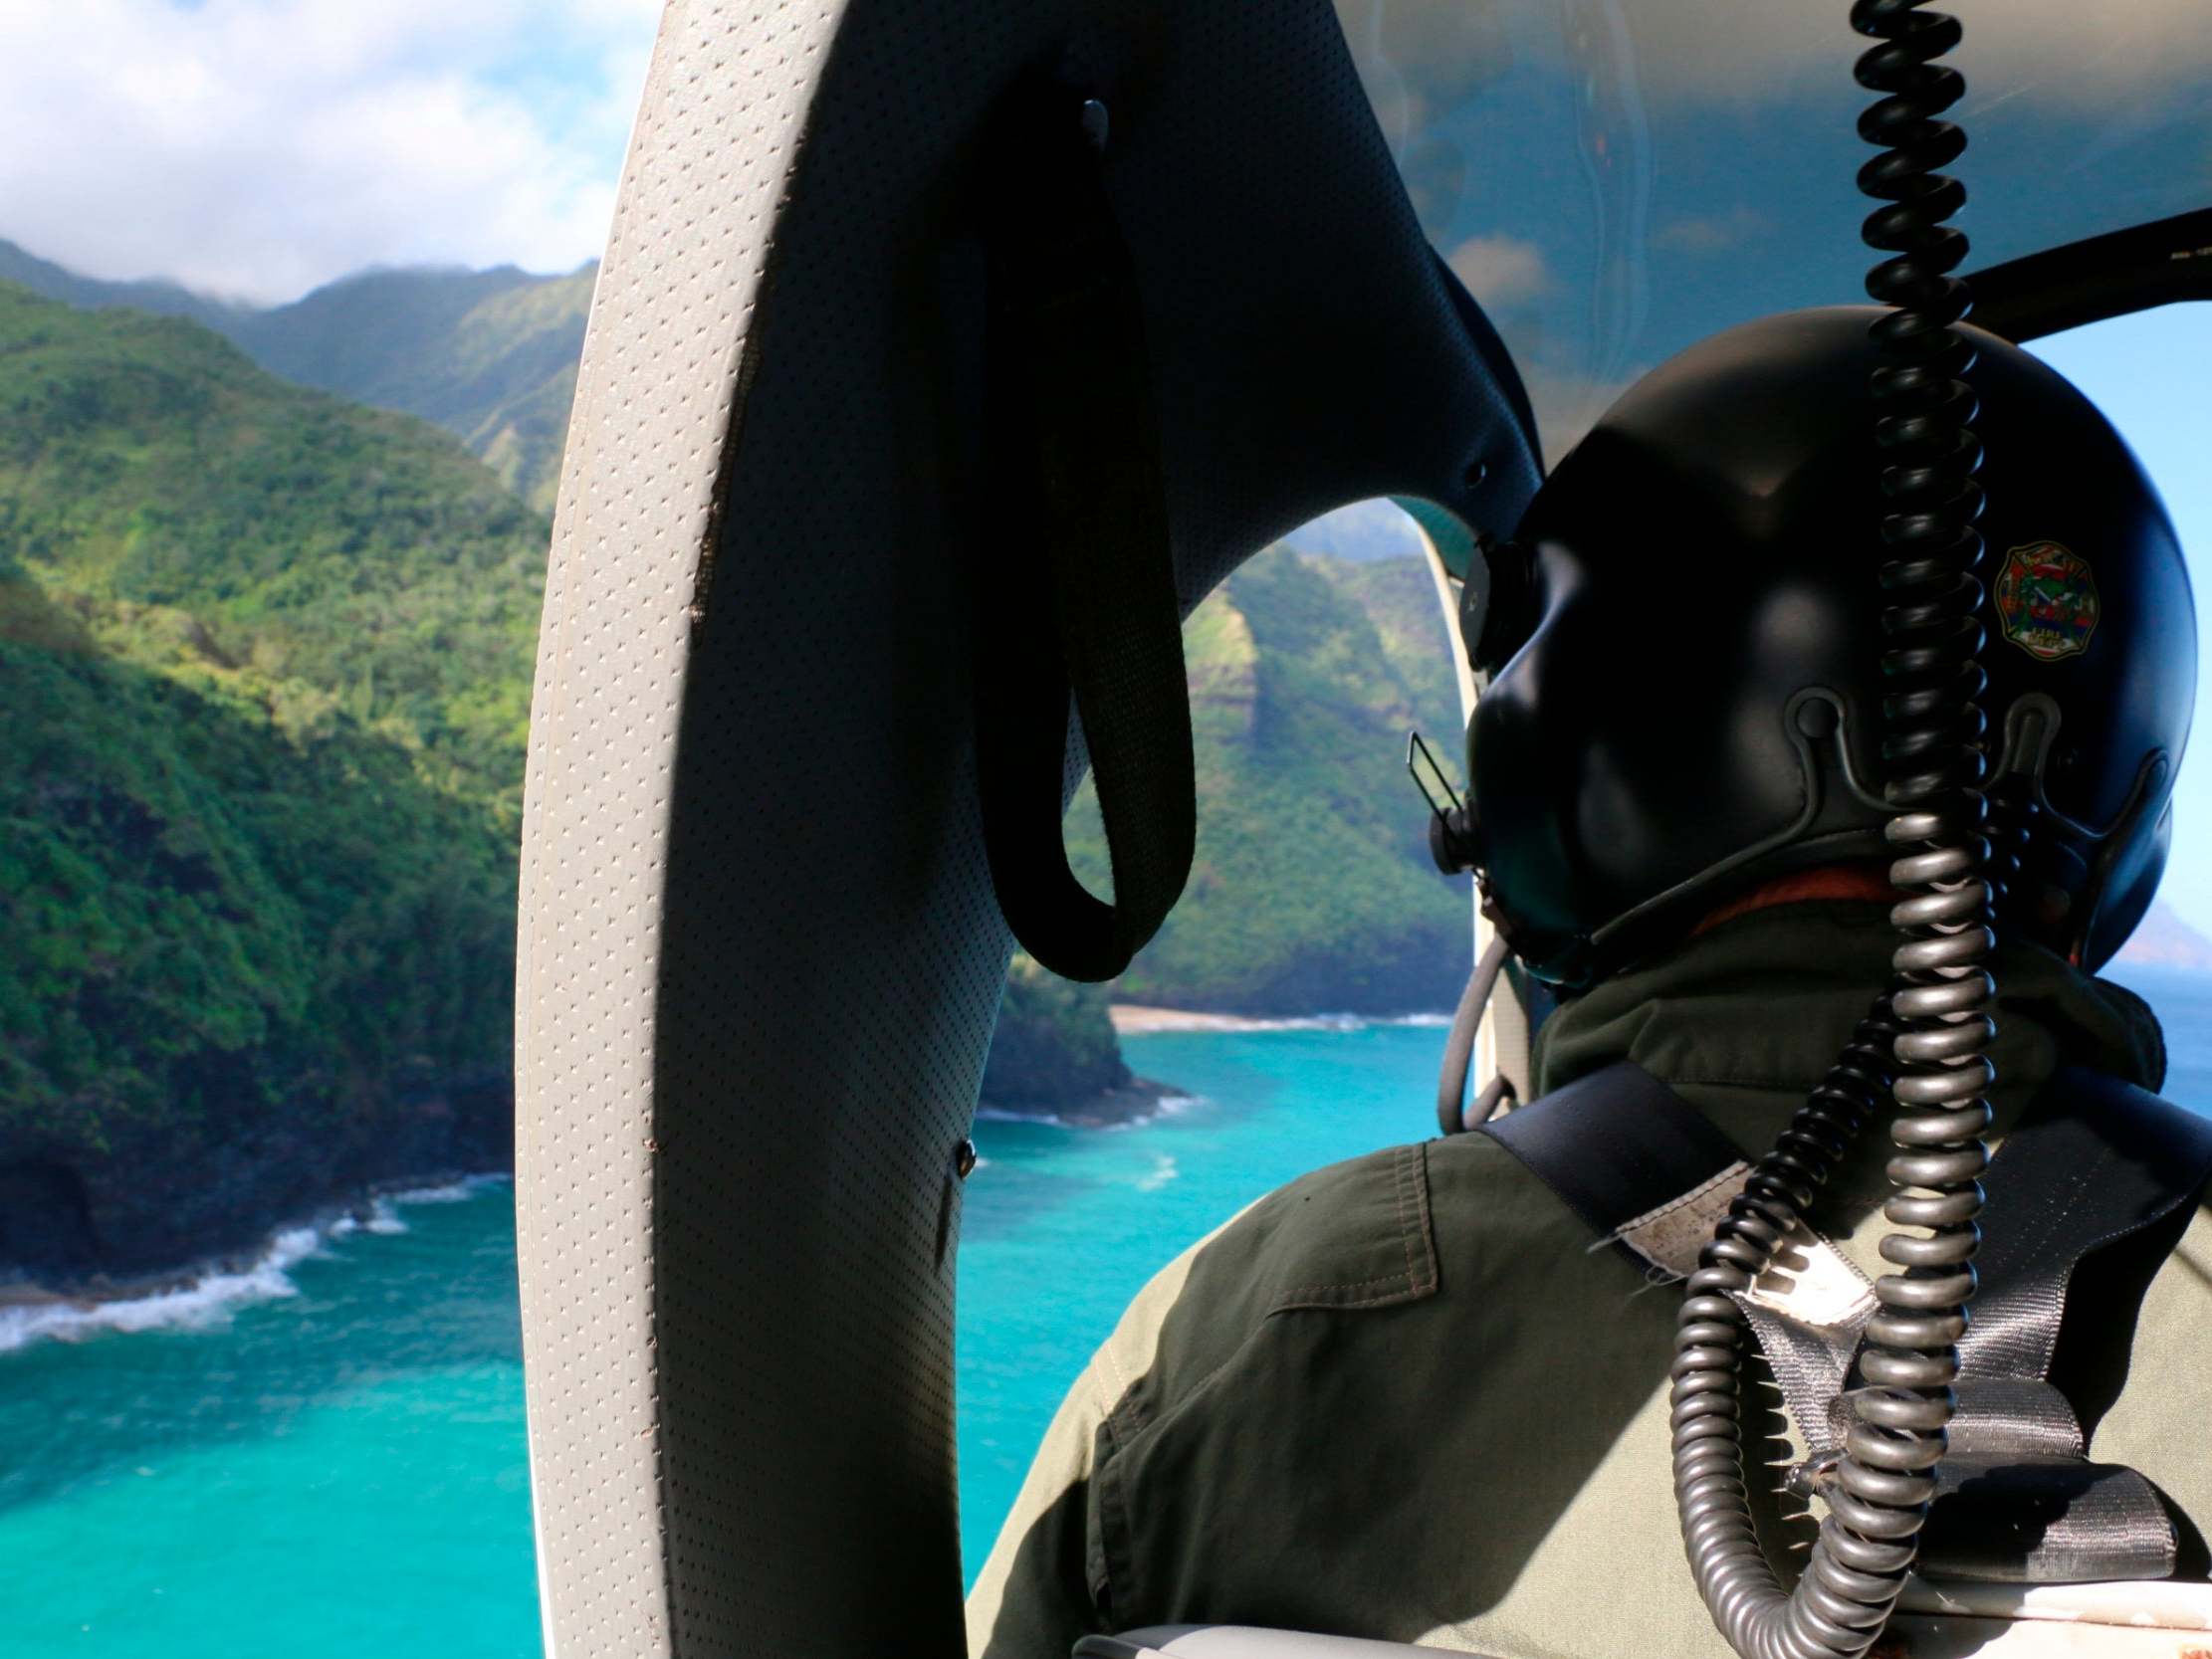 A Coast Guard search and rescue team look over Napali Coast State Wilderness Park for the previously missing helicopter